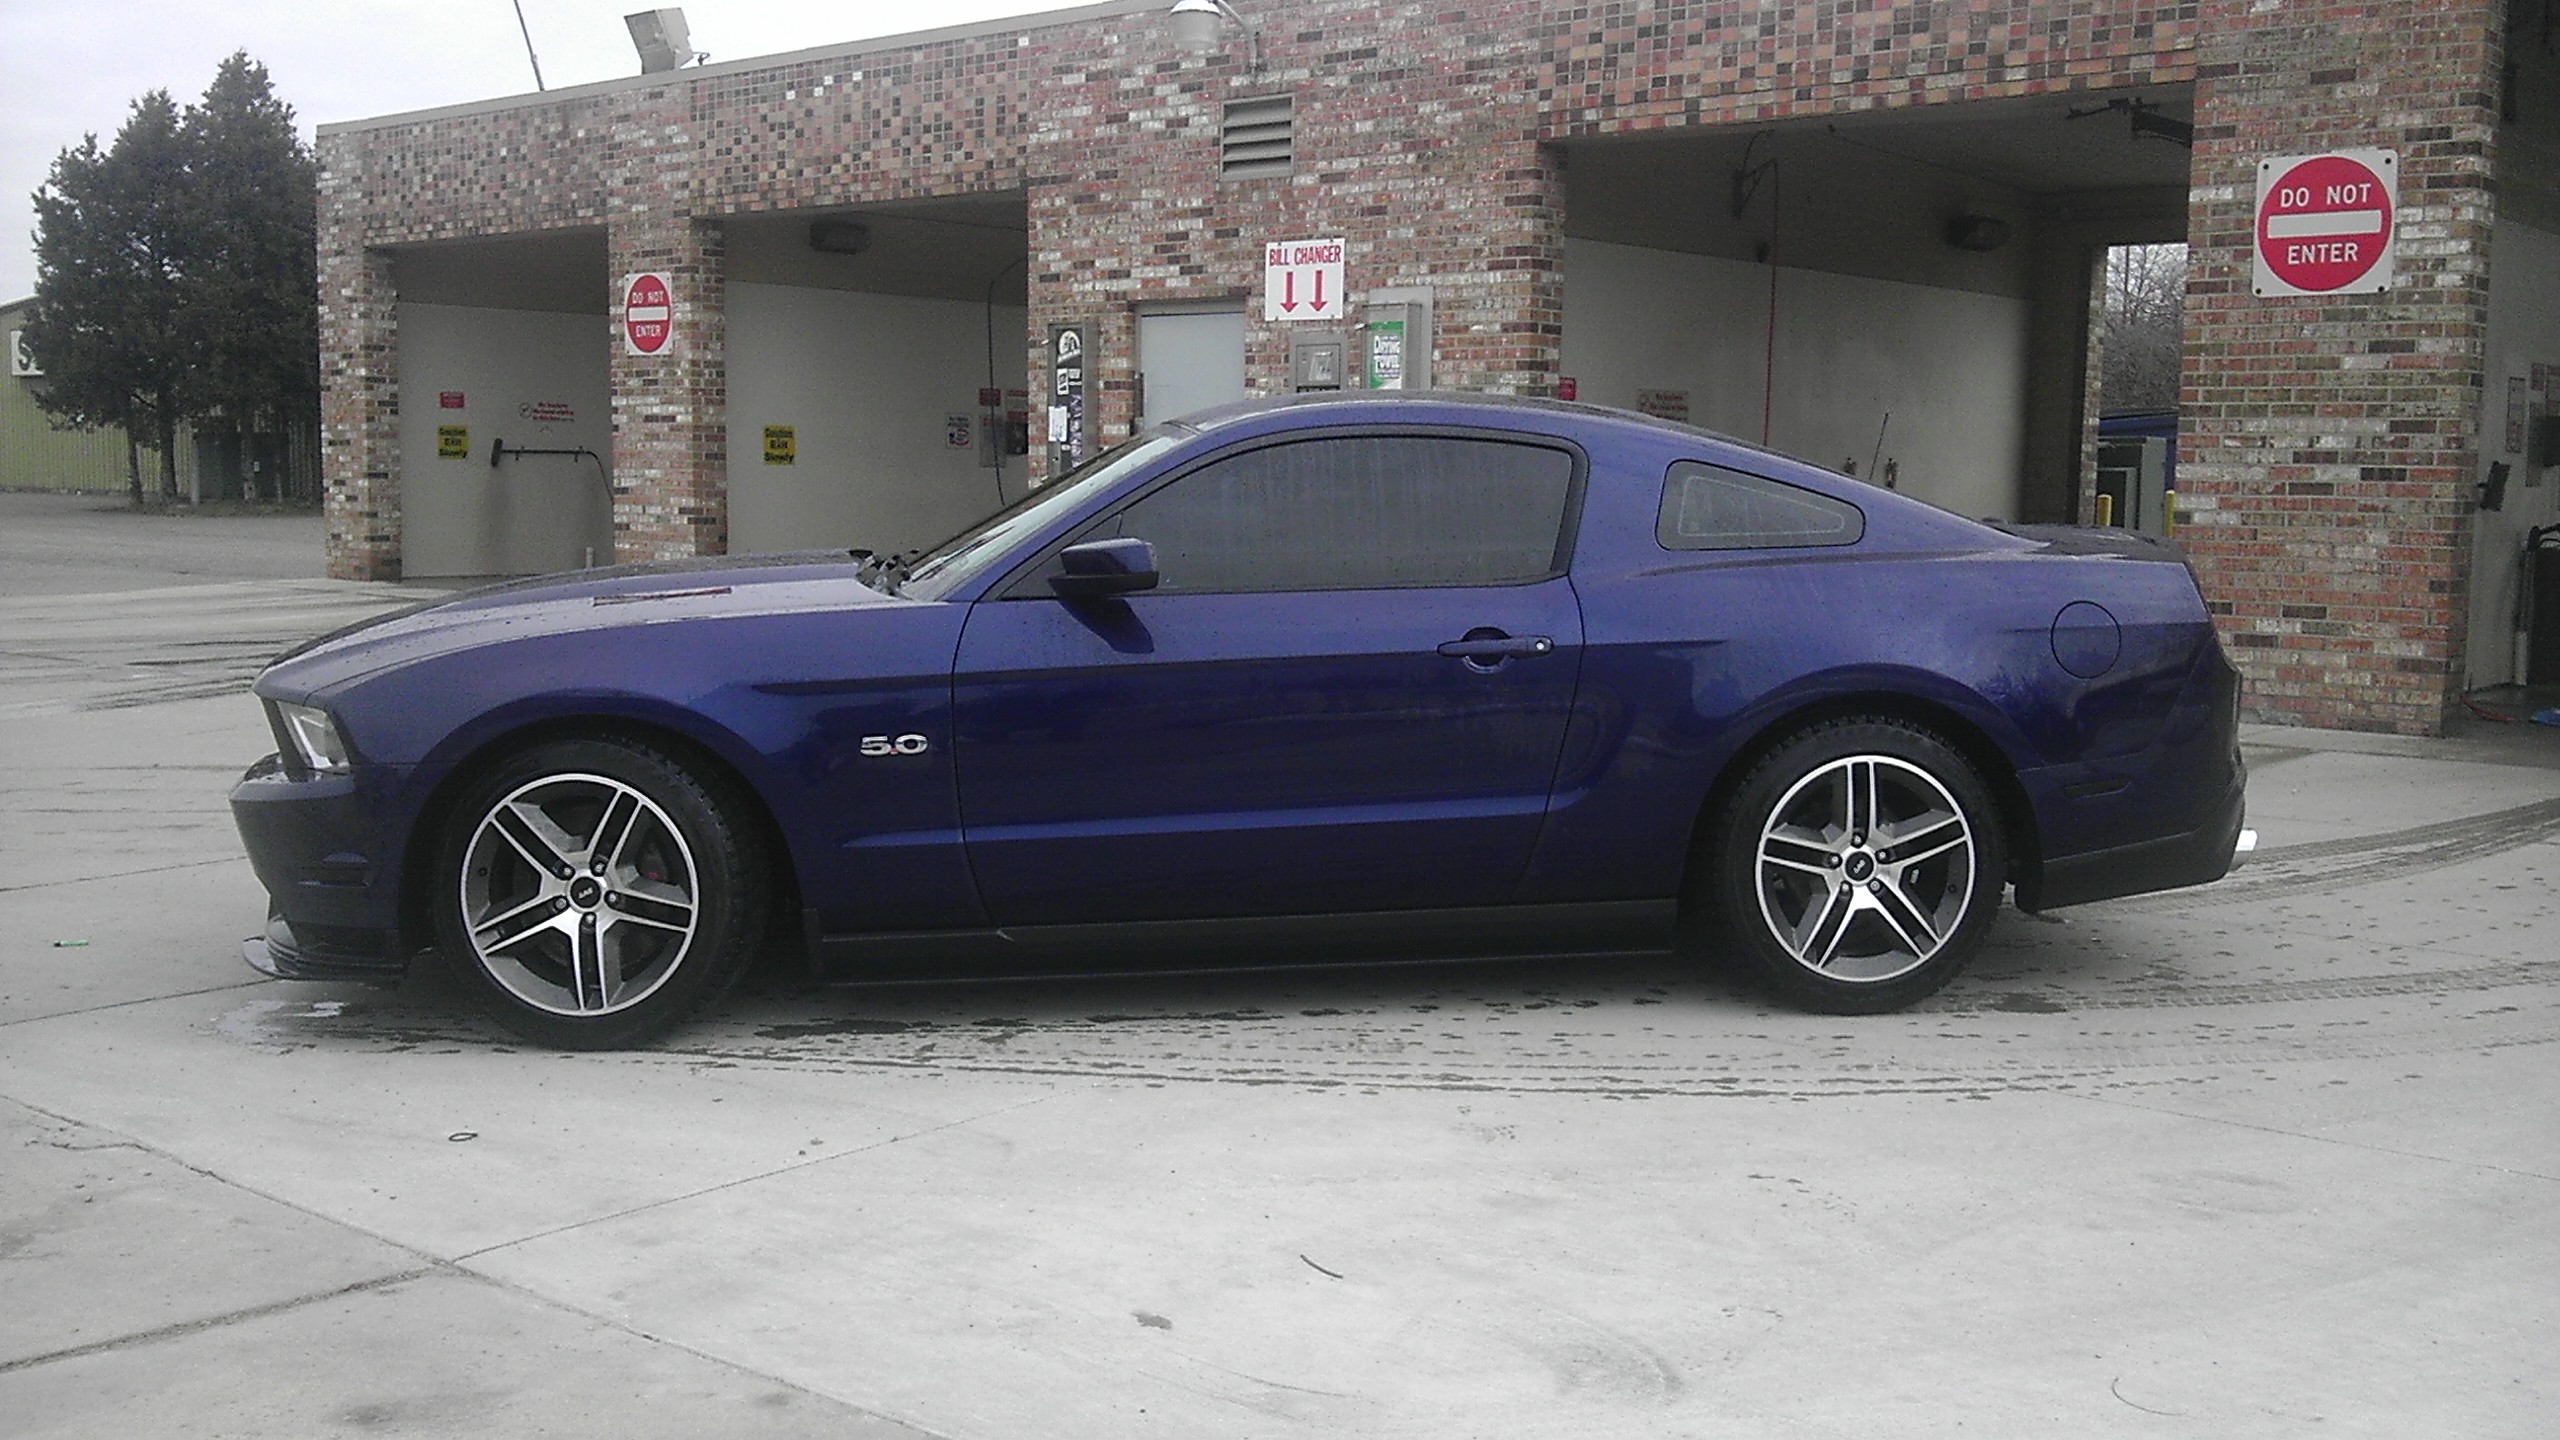 2011 Ford mustang gt snow tires #2